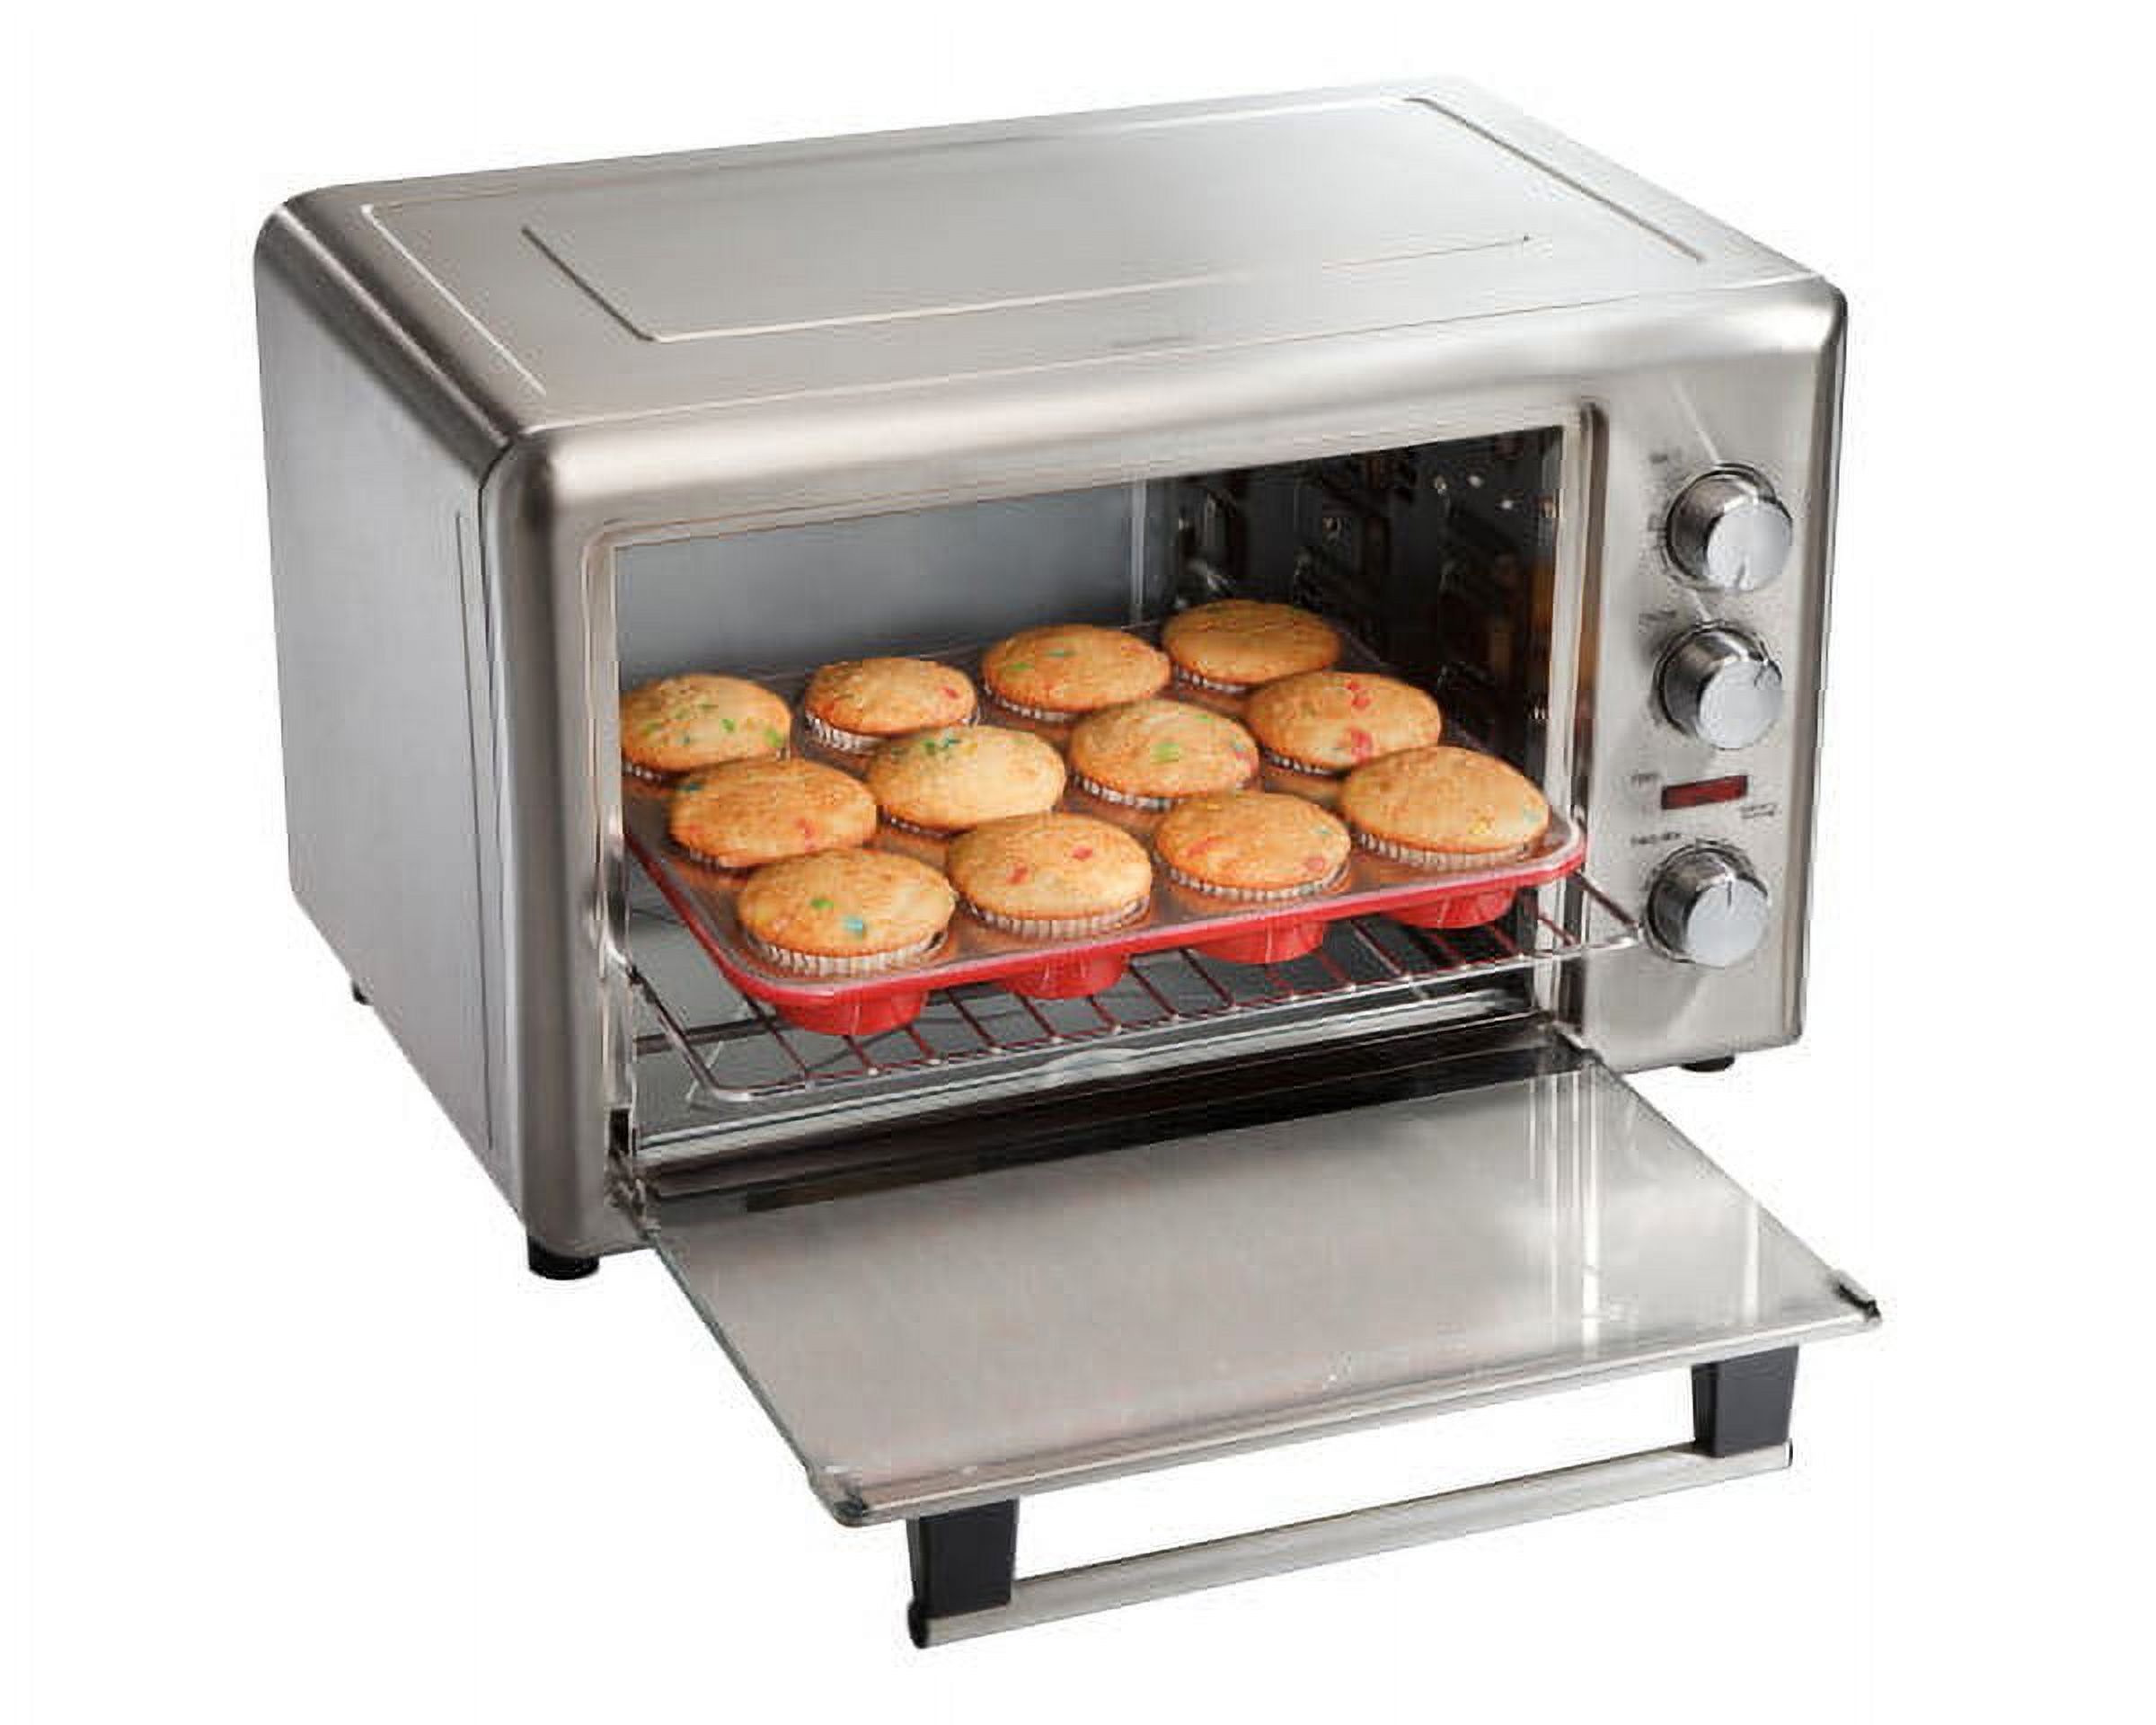 Hamilton Beach Countertop Oven with Convection and Rotisserie, Baking, Broil, Extra Large Capacity, Stainless Steel, 31103 - image 5 of 6